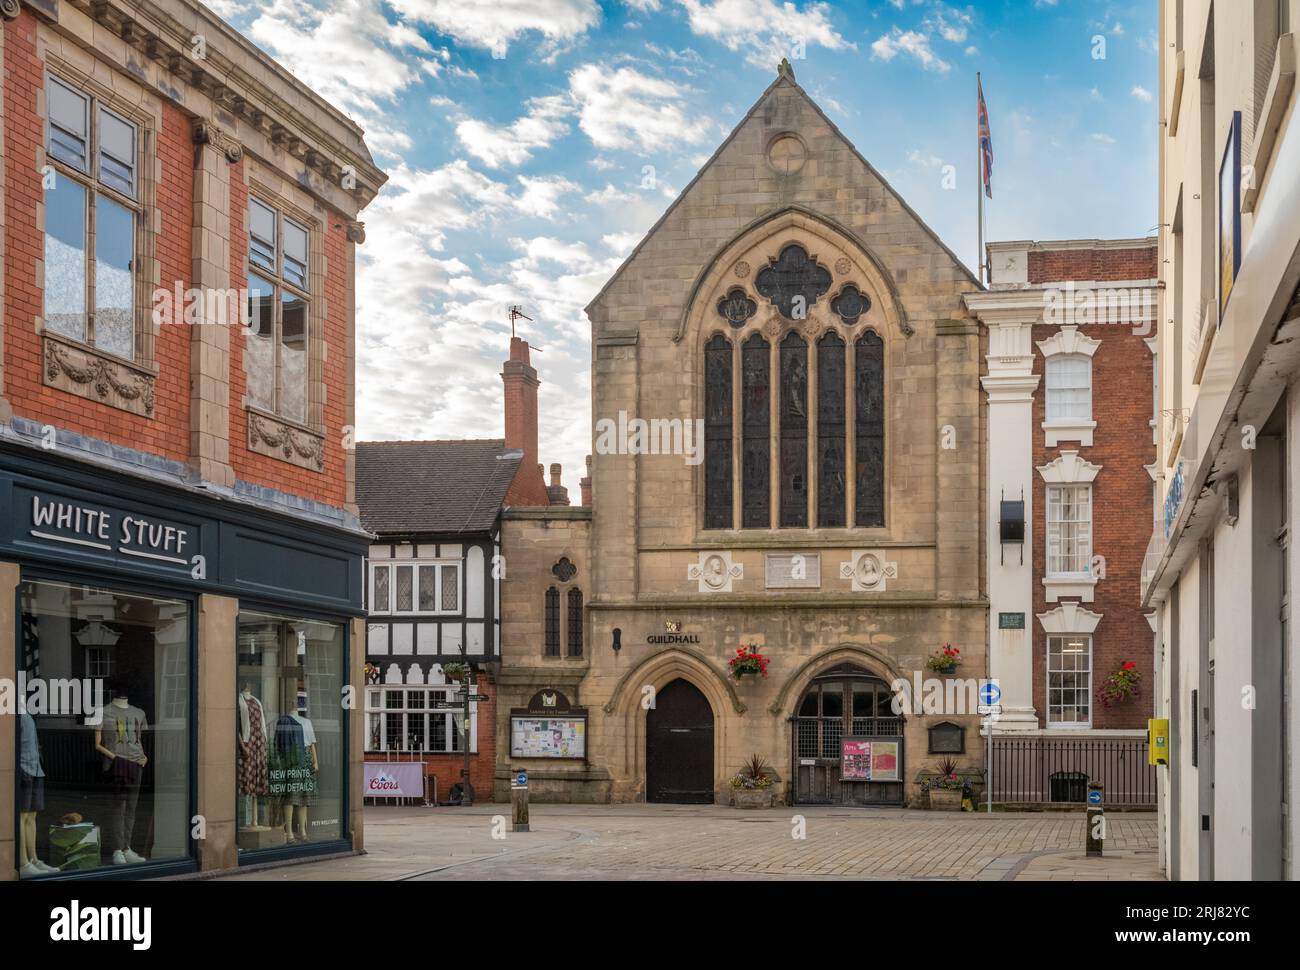 The 18th Century Guildhall building in Lichfield, Staffordshire, UK.  The Guildhall is used for civic events, rooms can be hired for meetings or dance Stock Photo